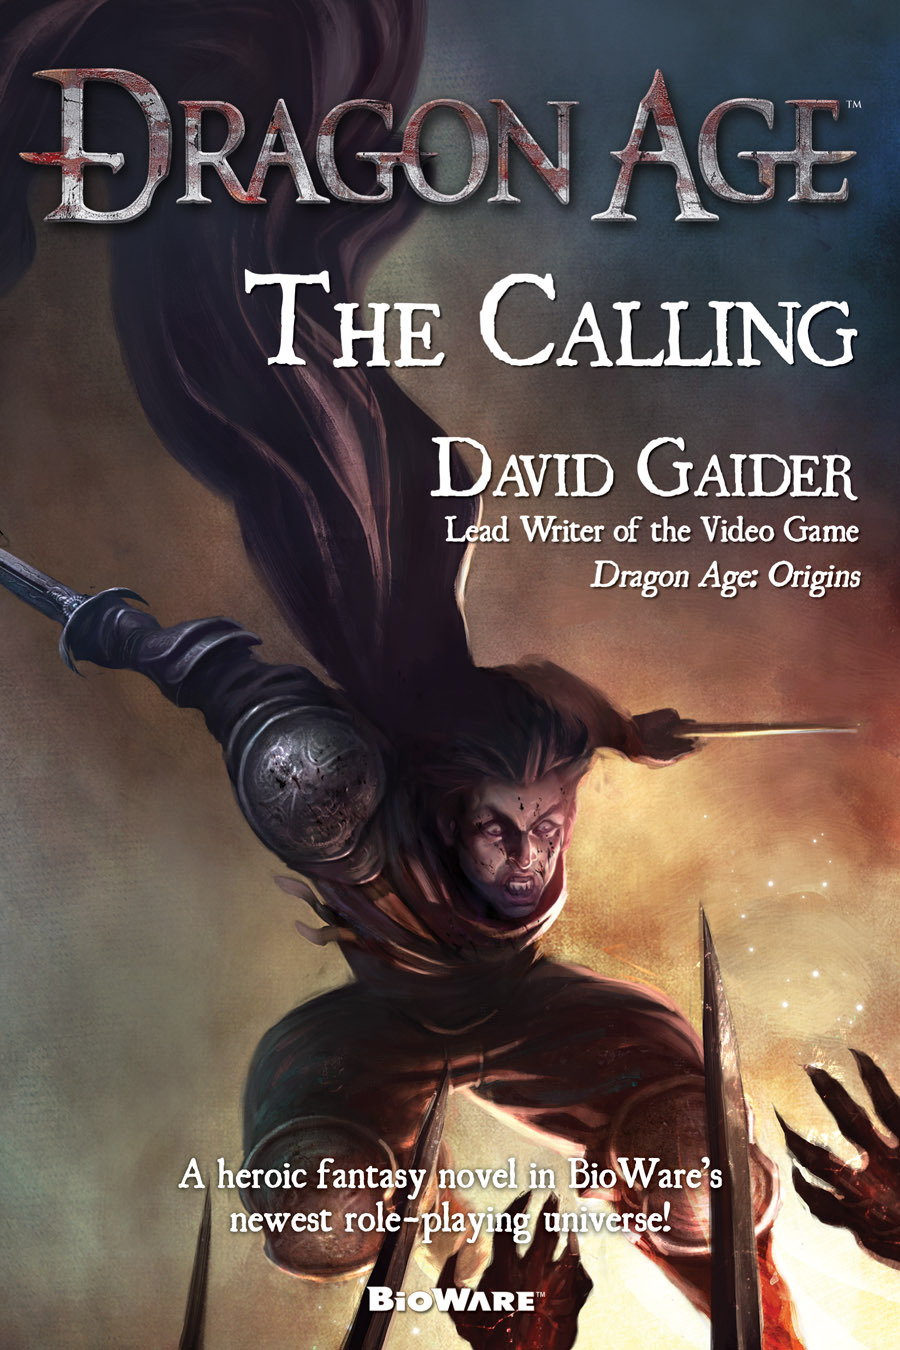 Dragon-age-the-calling-1375453082387769